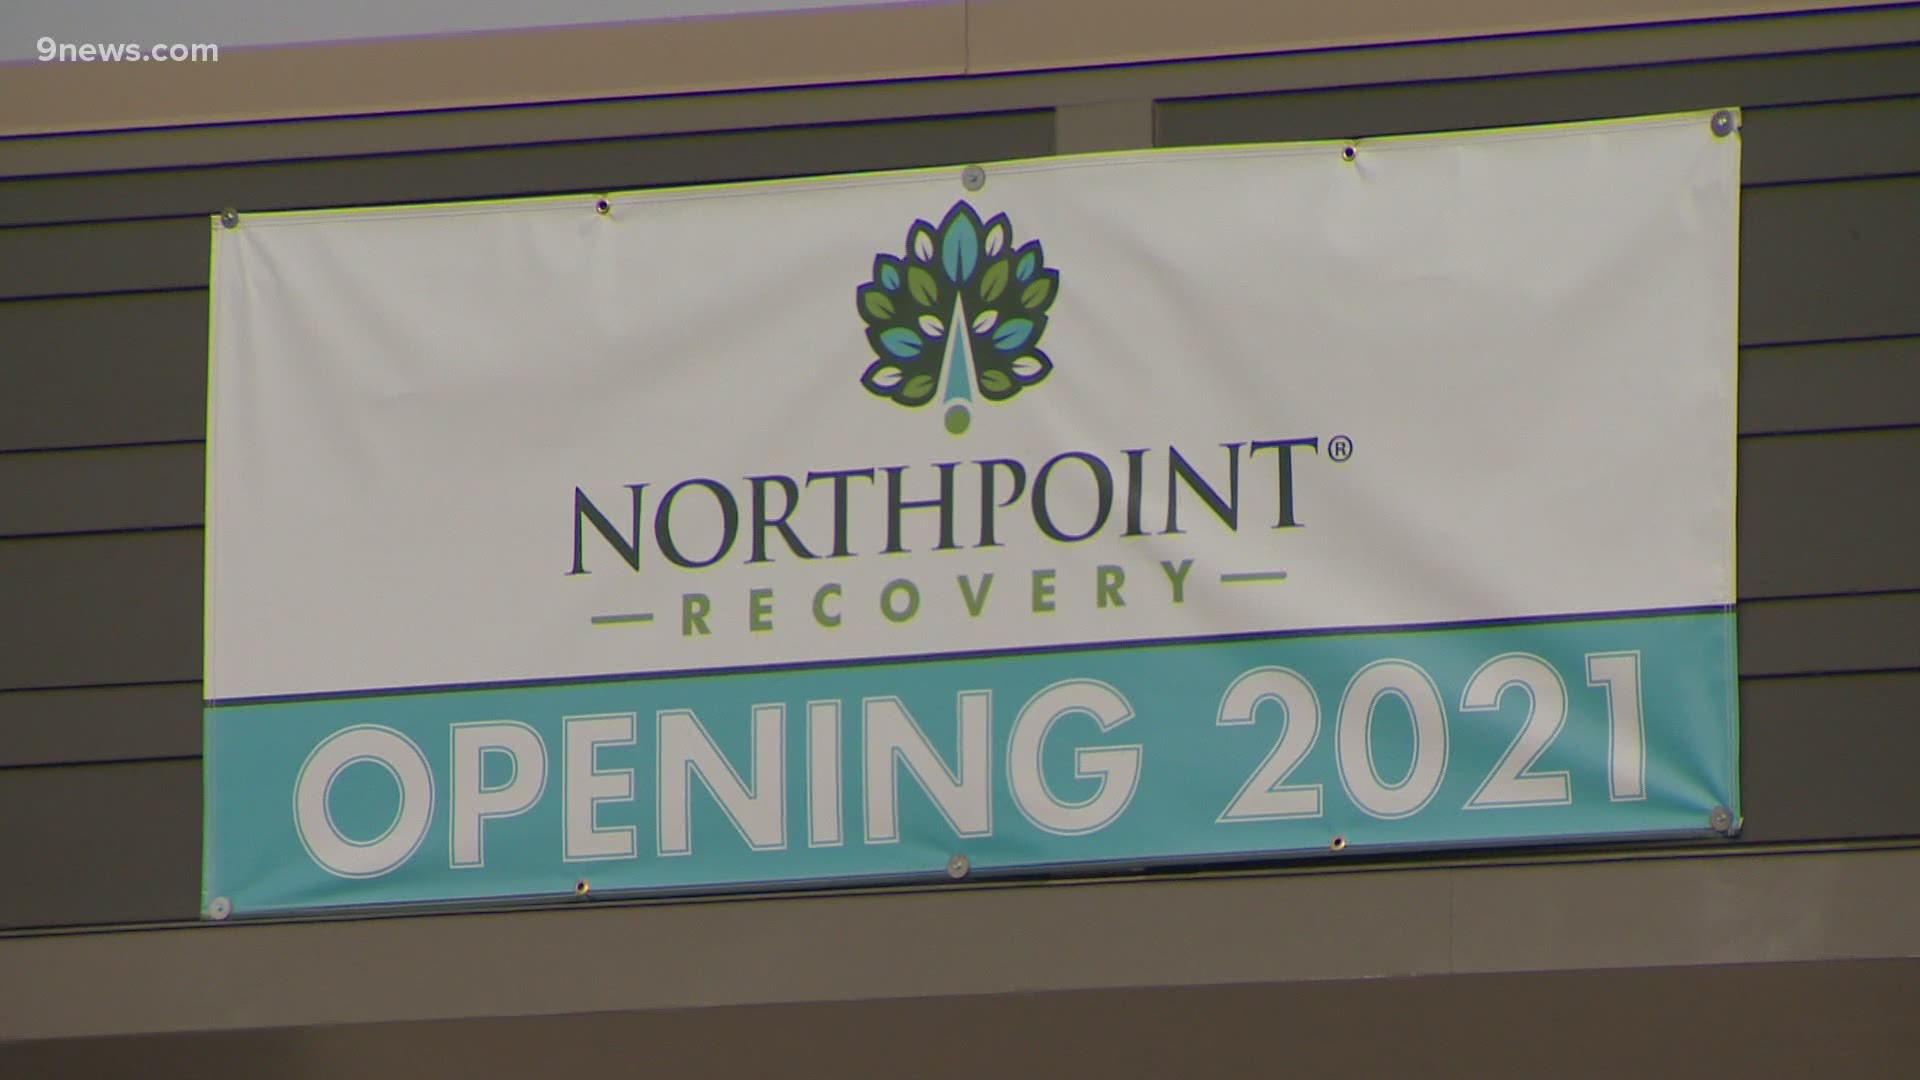 The Northpoint Recovery Colorado in Loveland is hoping to create new beginnings for those struggling with addiction.